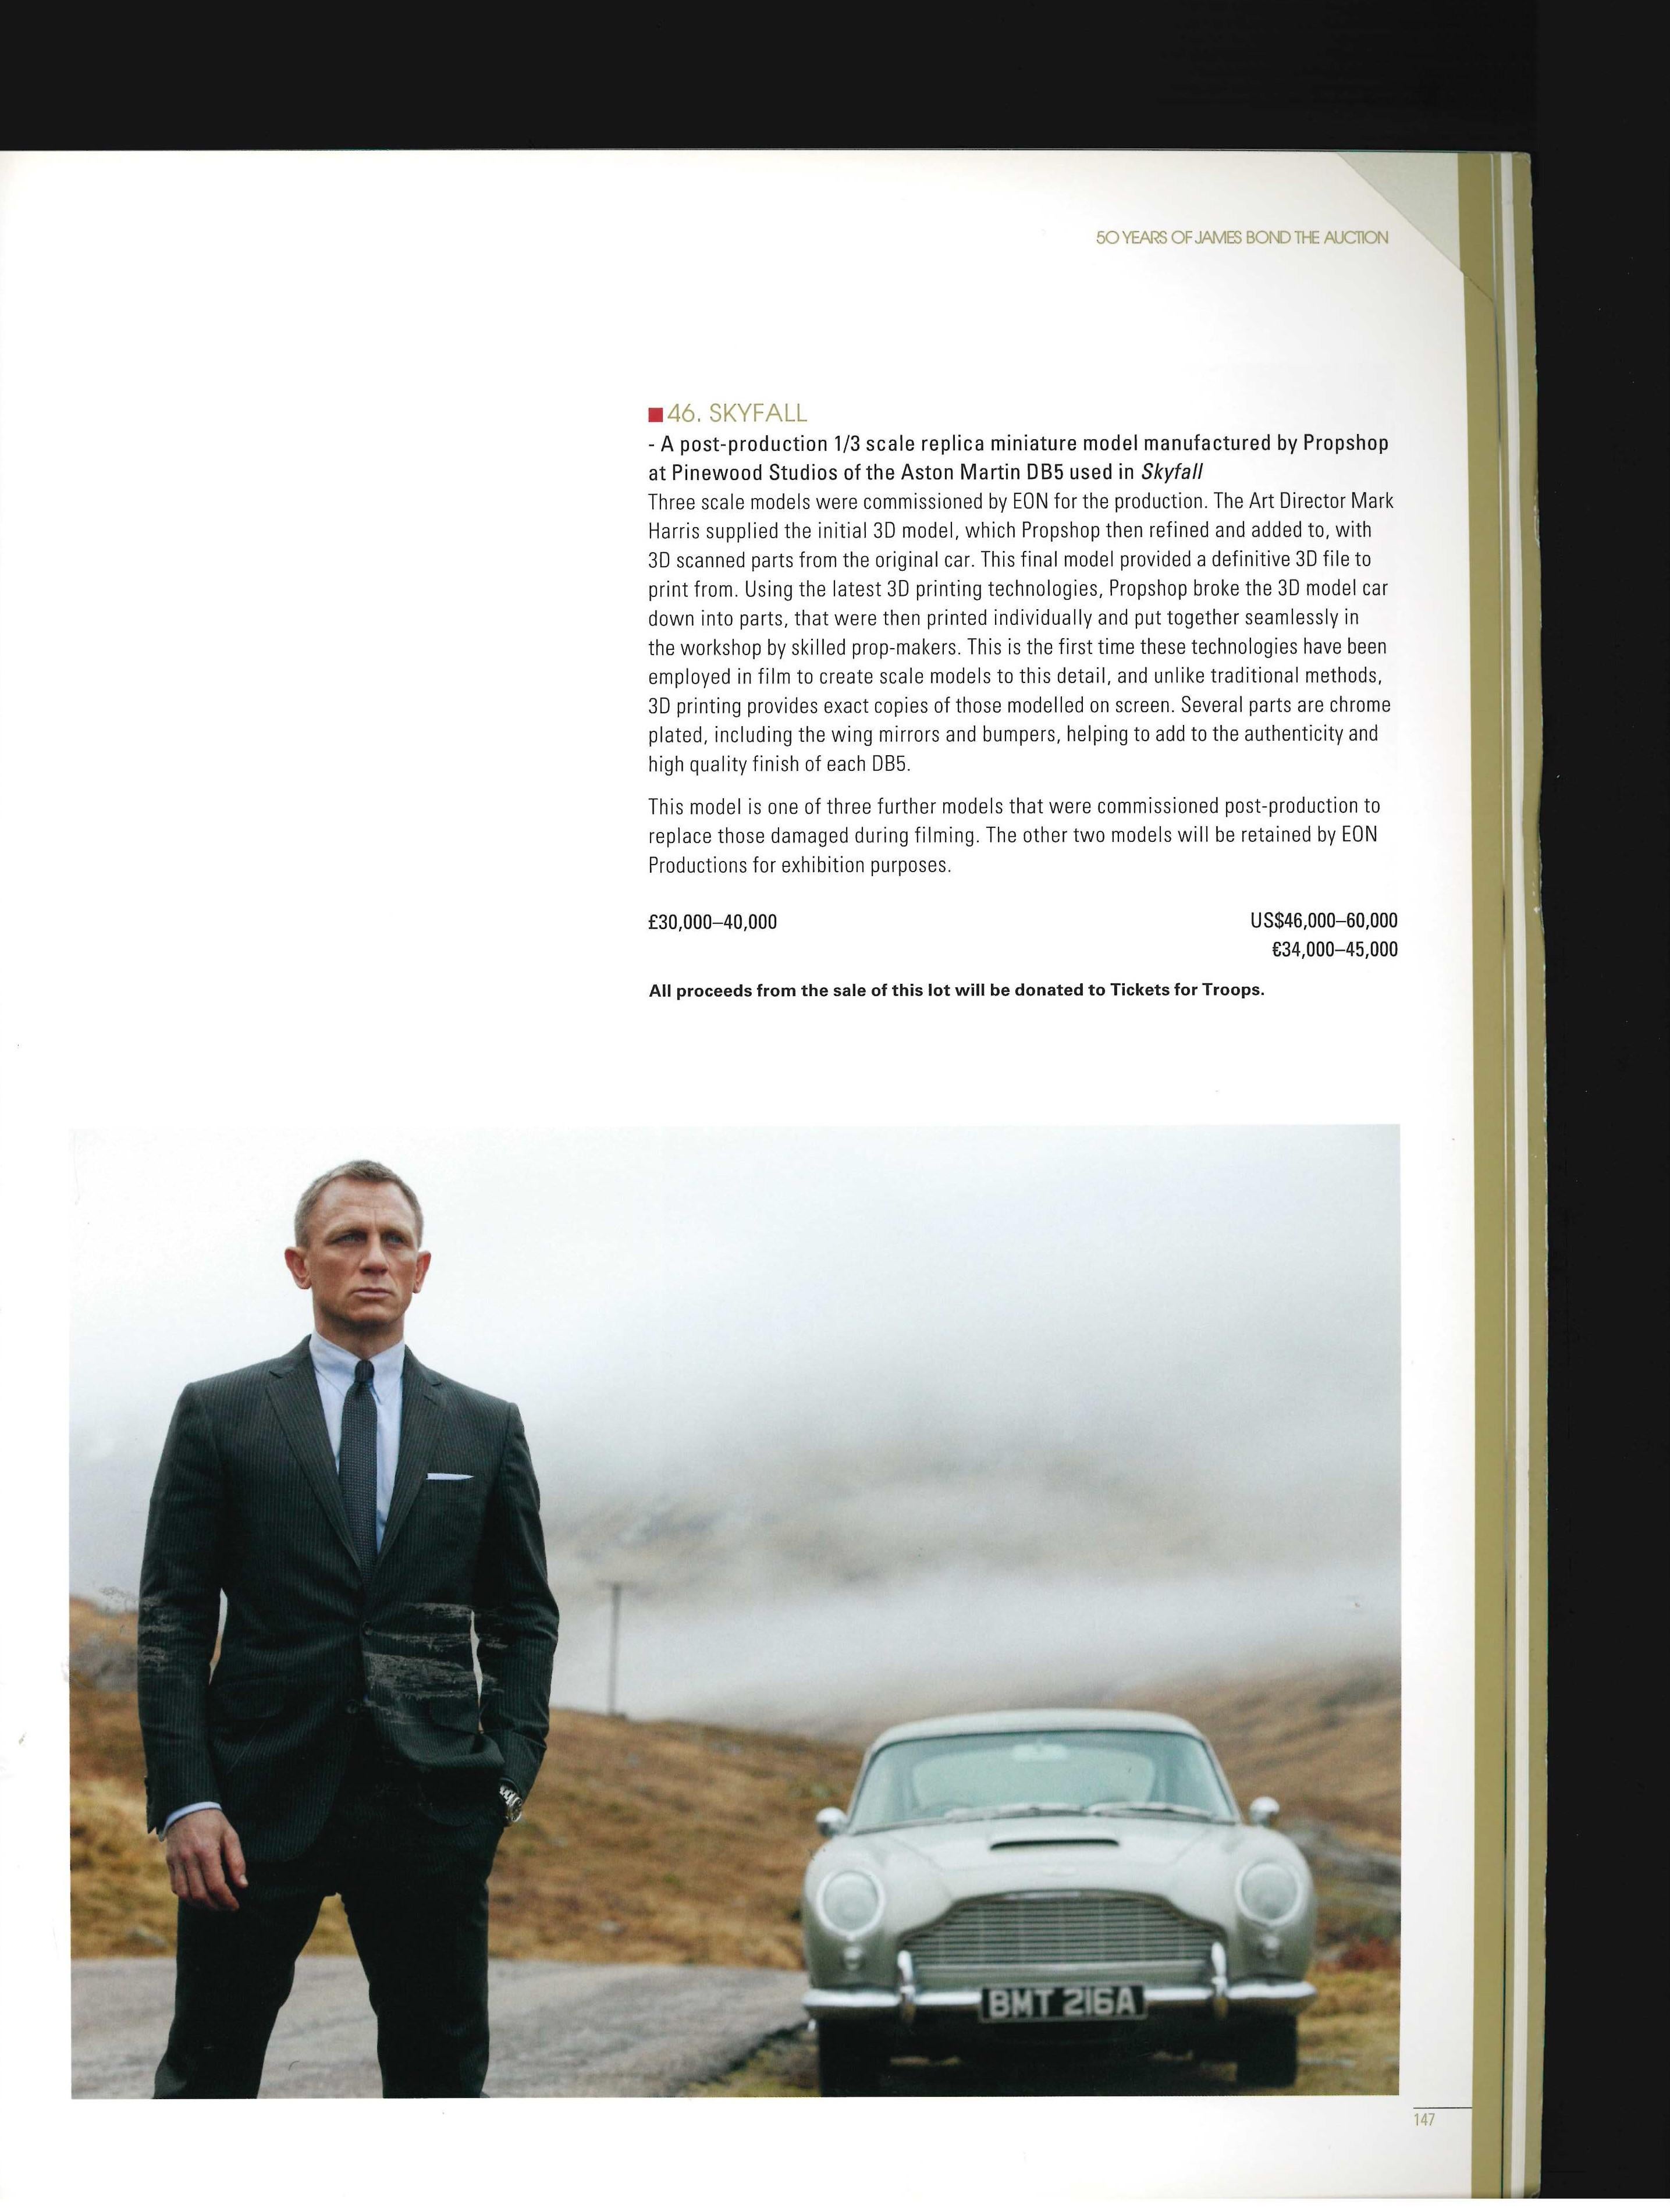 20th Century 50 Years of James Bond the Auction (Book)